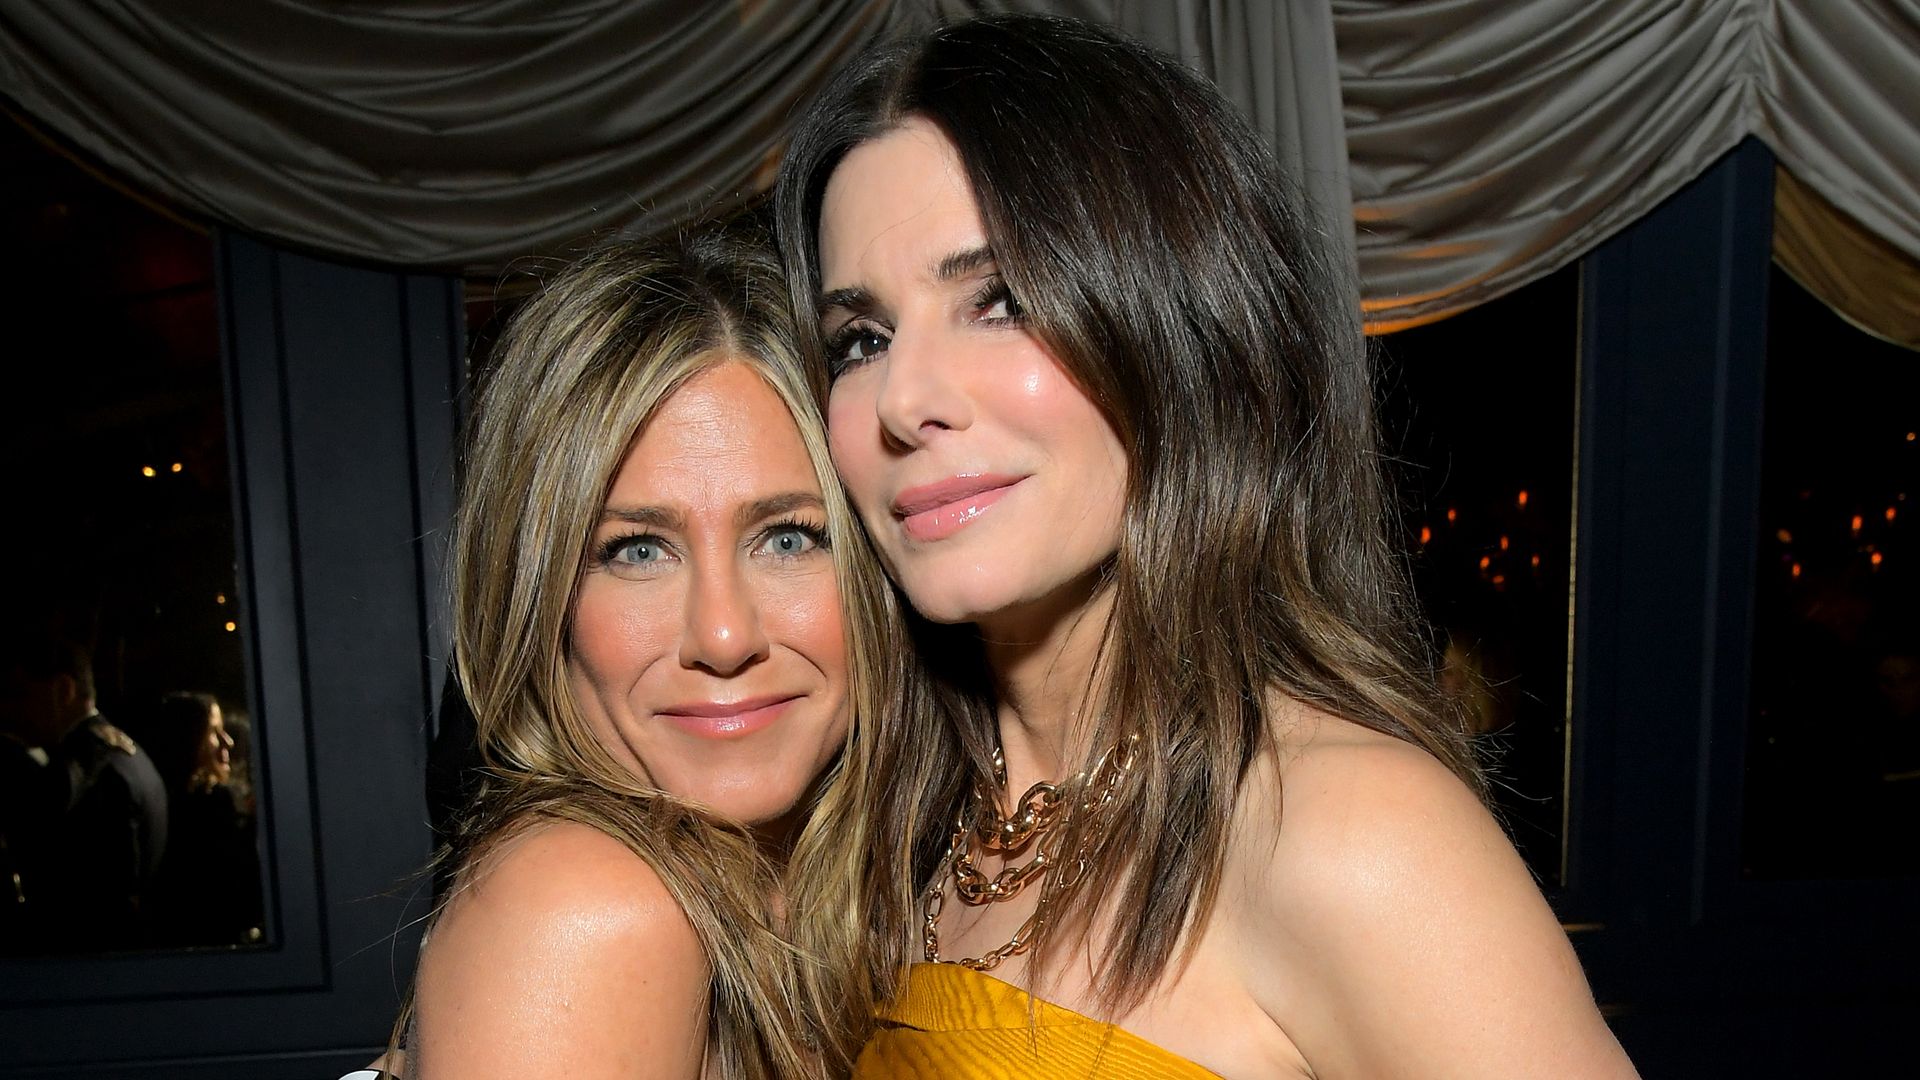 Sandra Bullock supported by Jennifer Aniston following partner's tragic death – their unlikely friendship explored